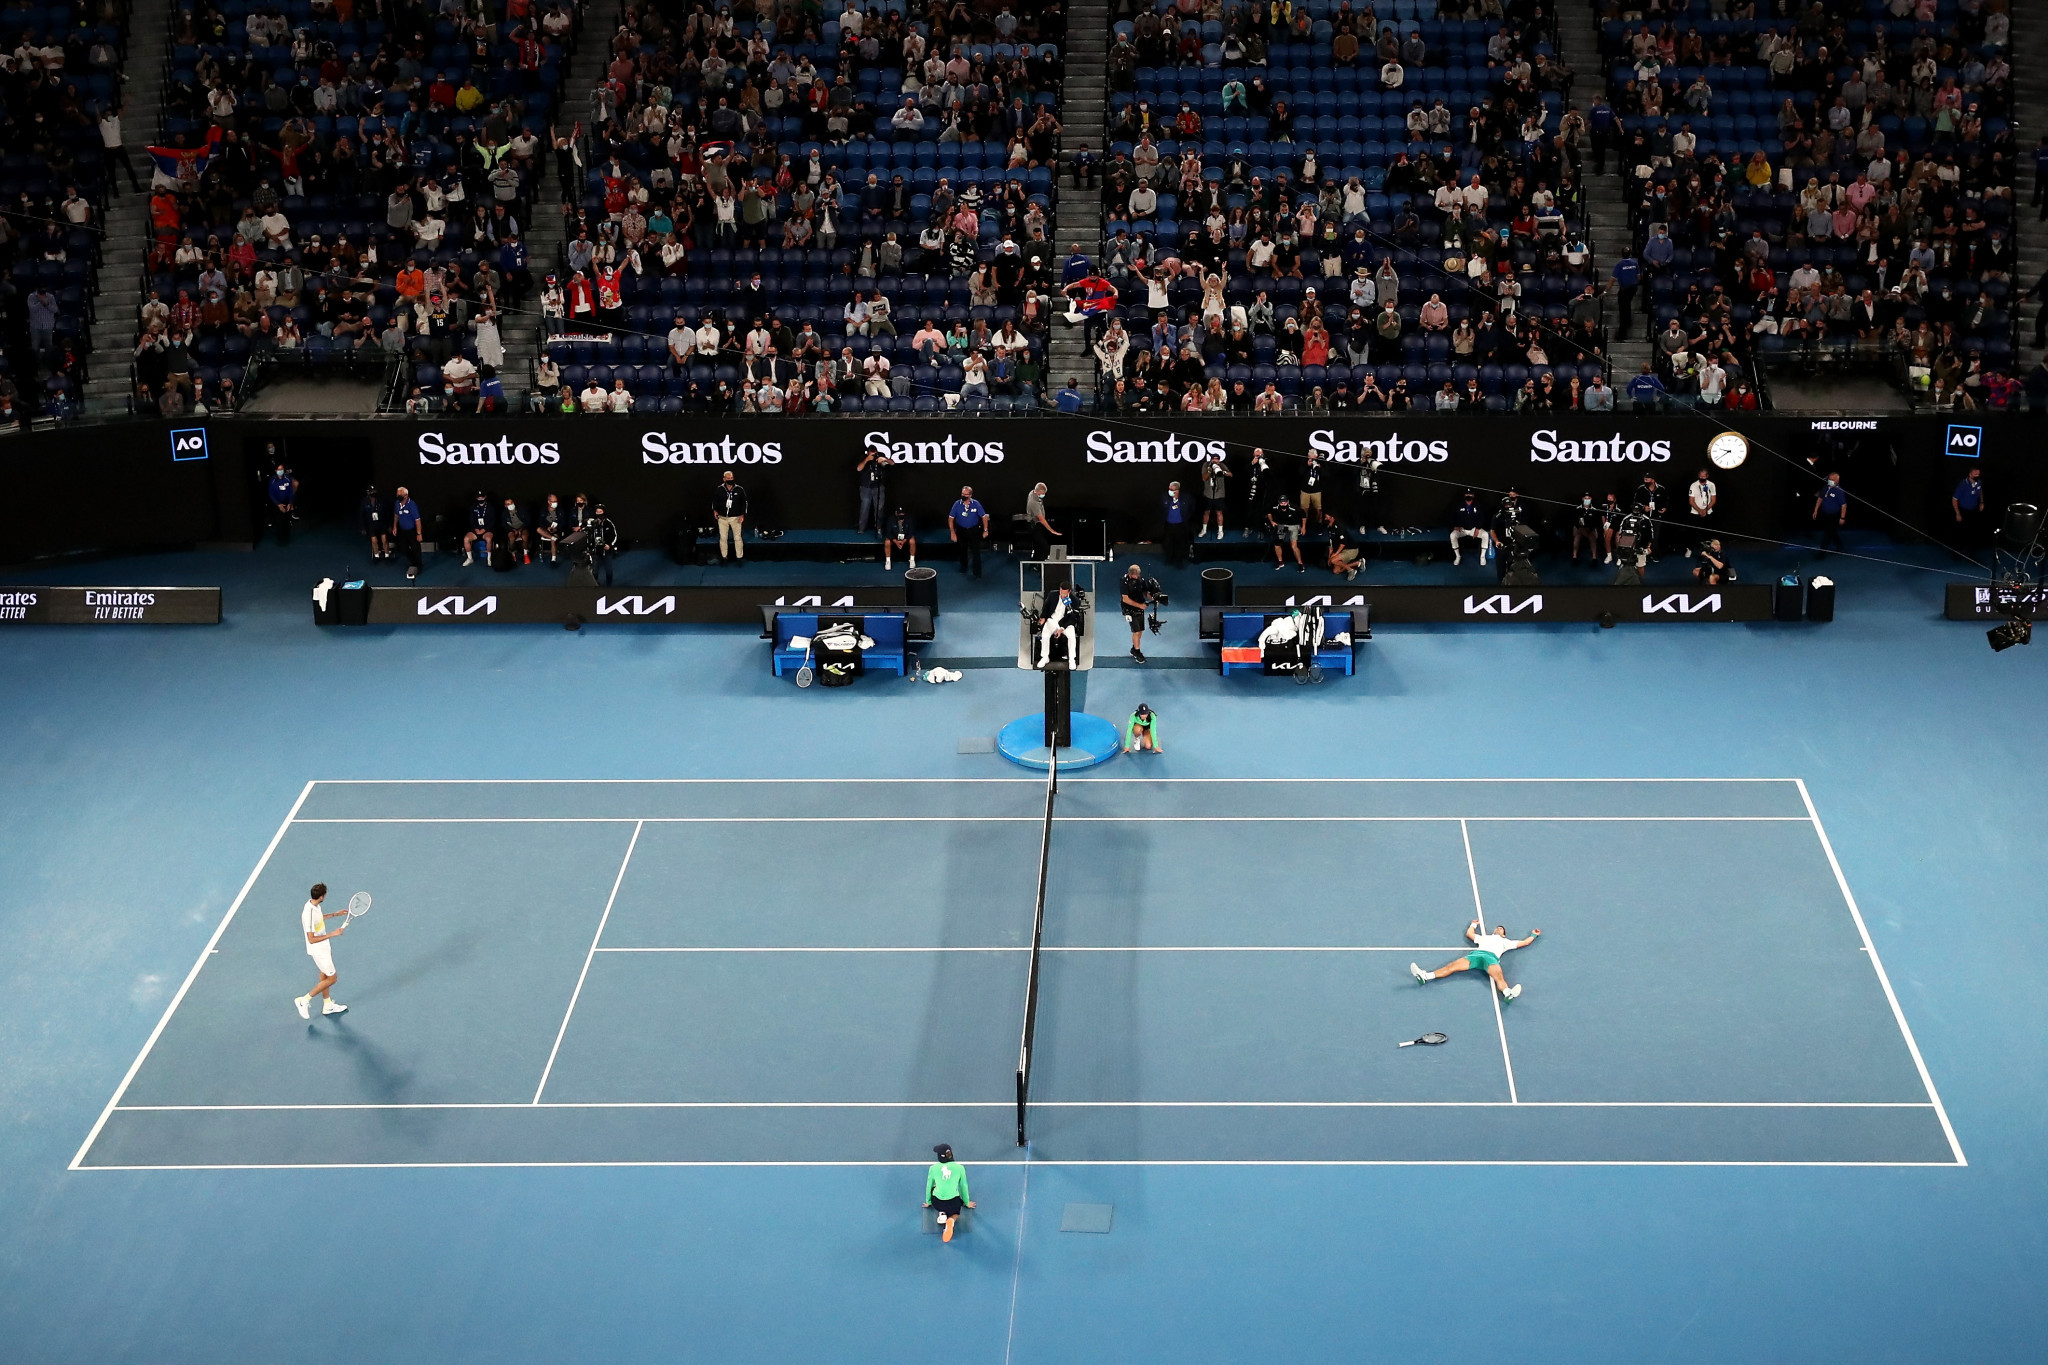 Oil and gas firm Santos, who logo featured prominently at last year's Australian Open, have been dropped from the list of sponsors for this year's event following protests from environmental groups ©Getty Images